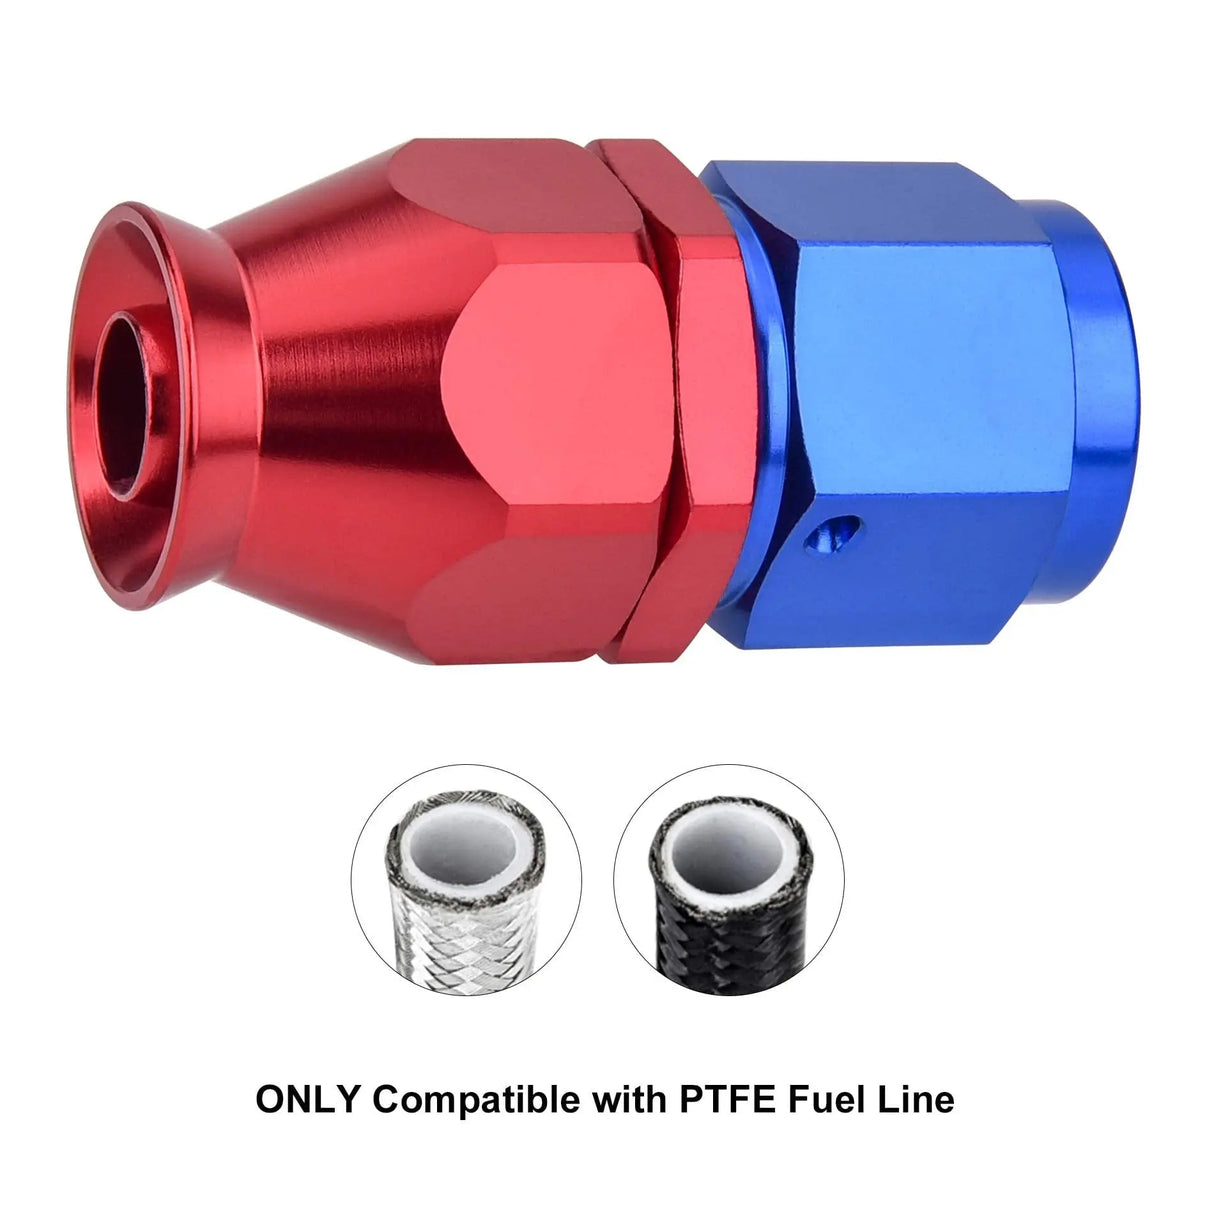 EVIL ENERGY Straight PTFE Hose End Only for PTFE E85 Fuel Line Fitting  Adapter Blue&Red (6/8/10AN)